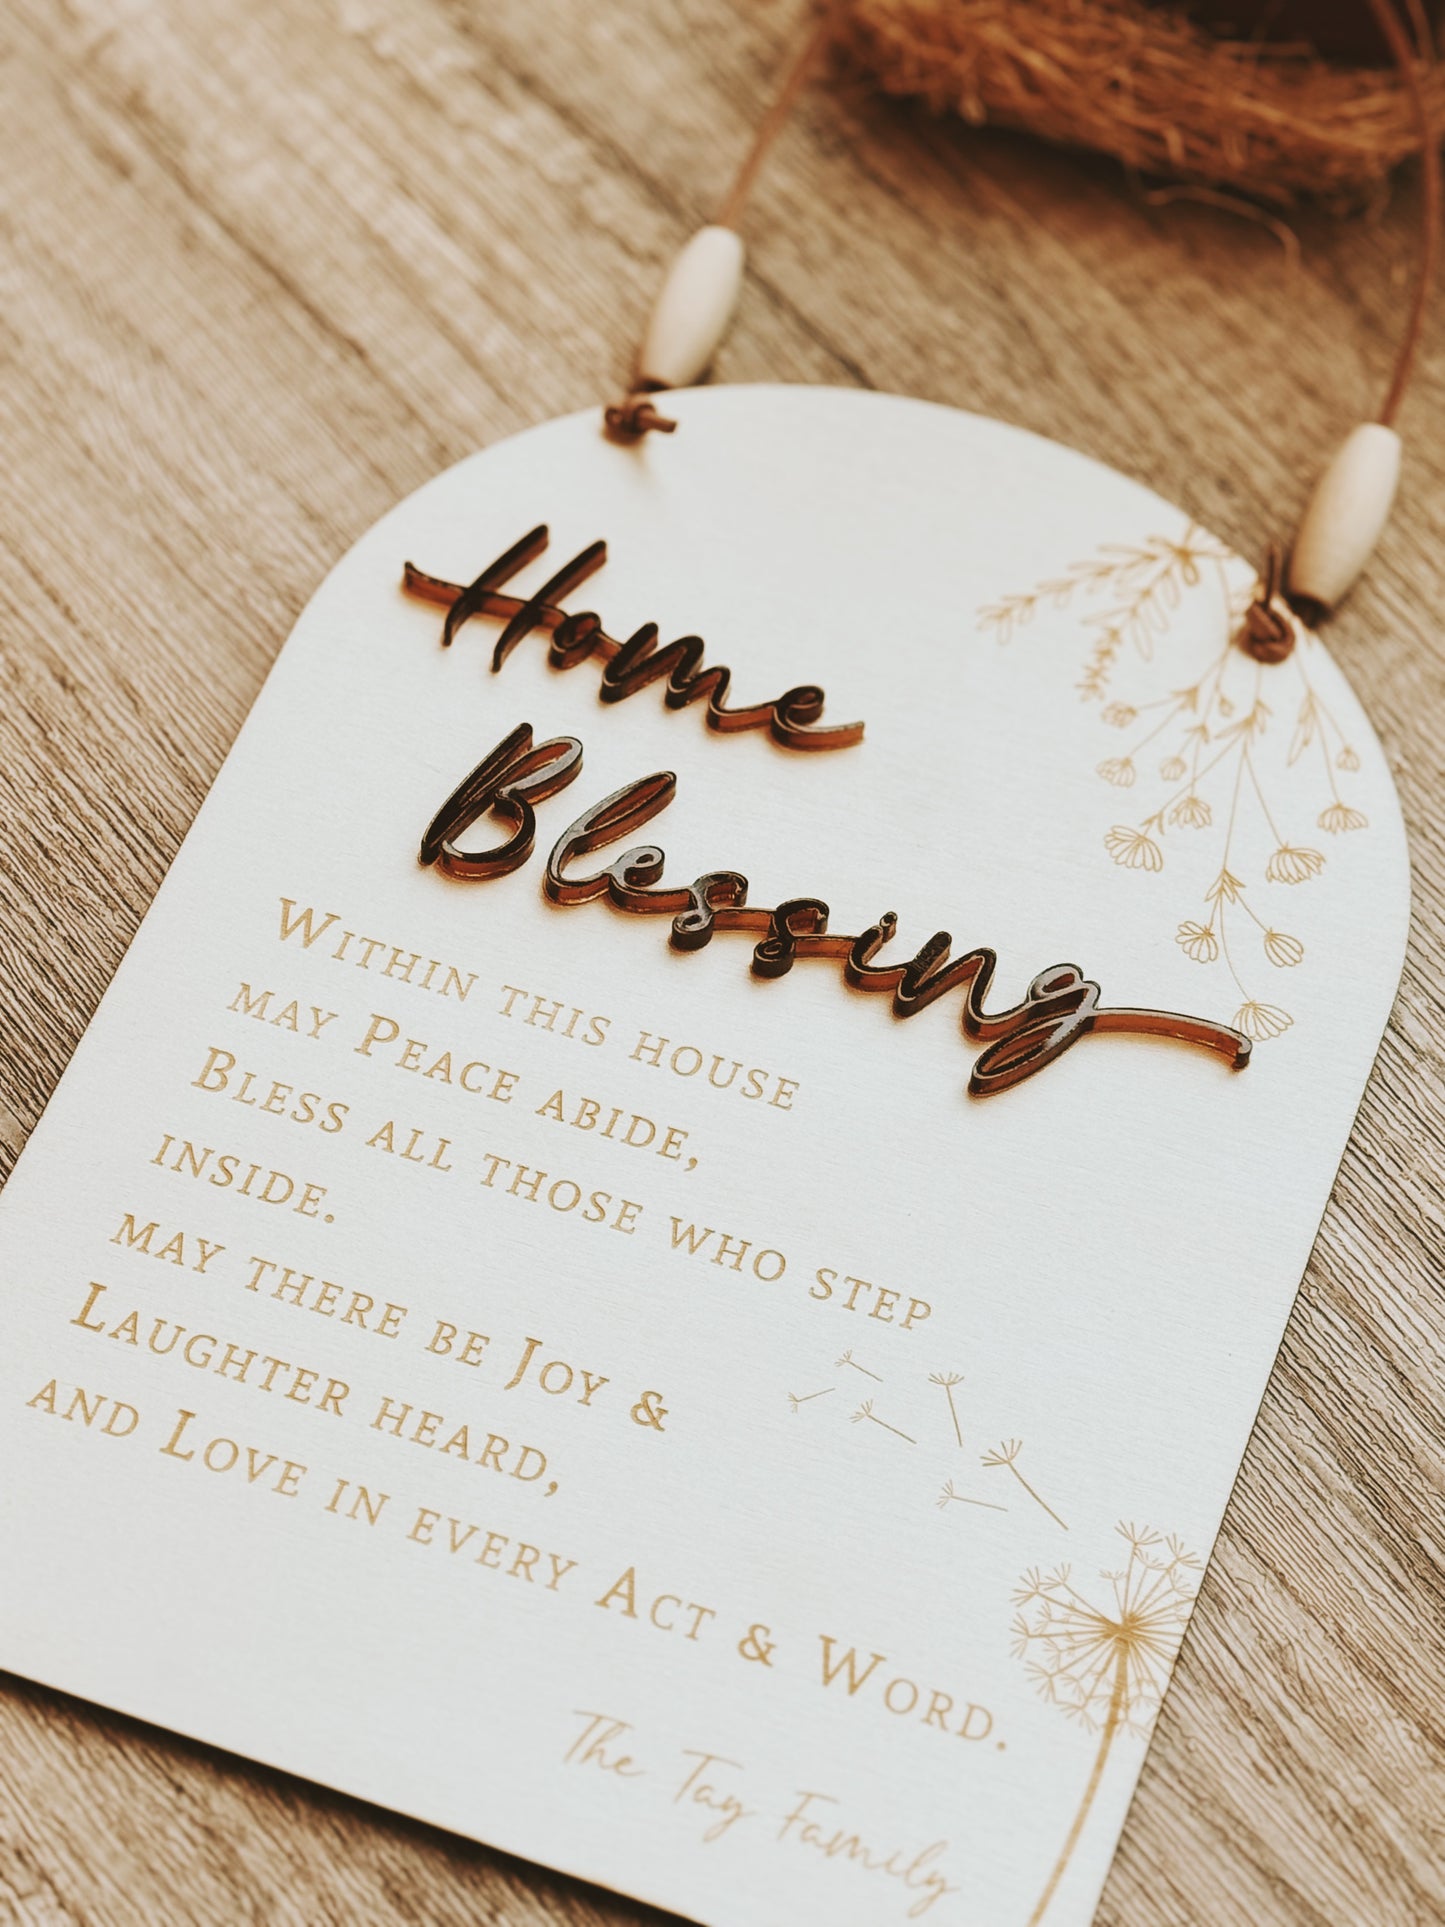 Home Blessing Hanging Plaque